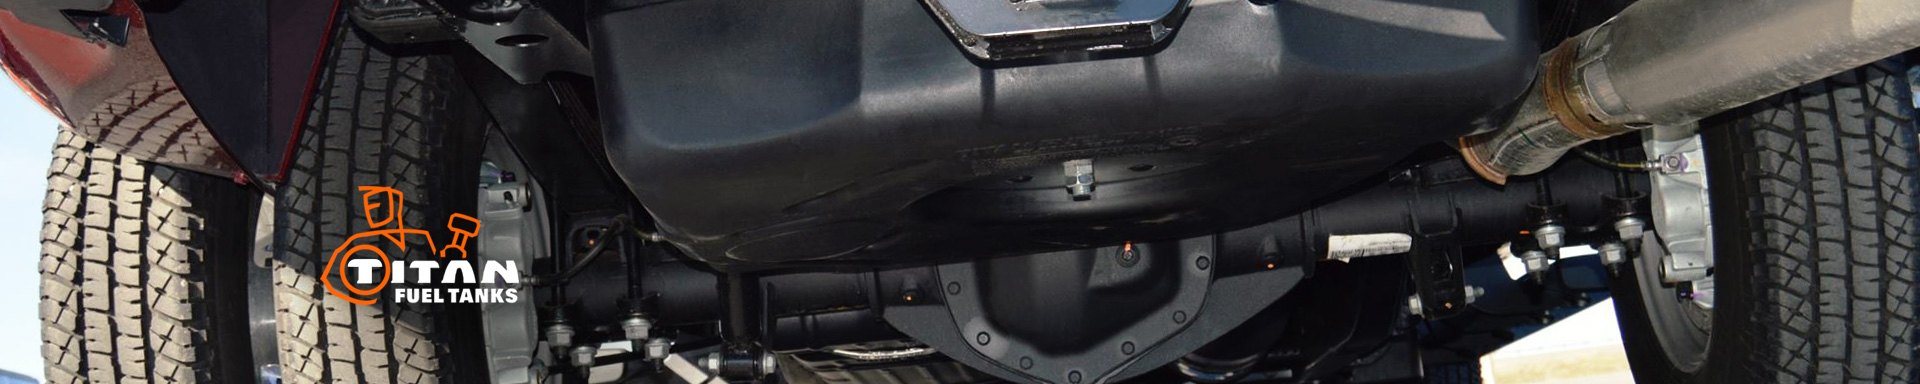 Titan Fuel Tanks Spare Tire Covers & Carriers